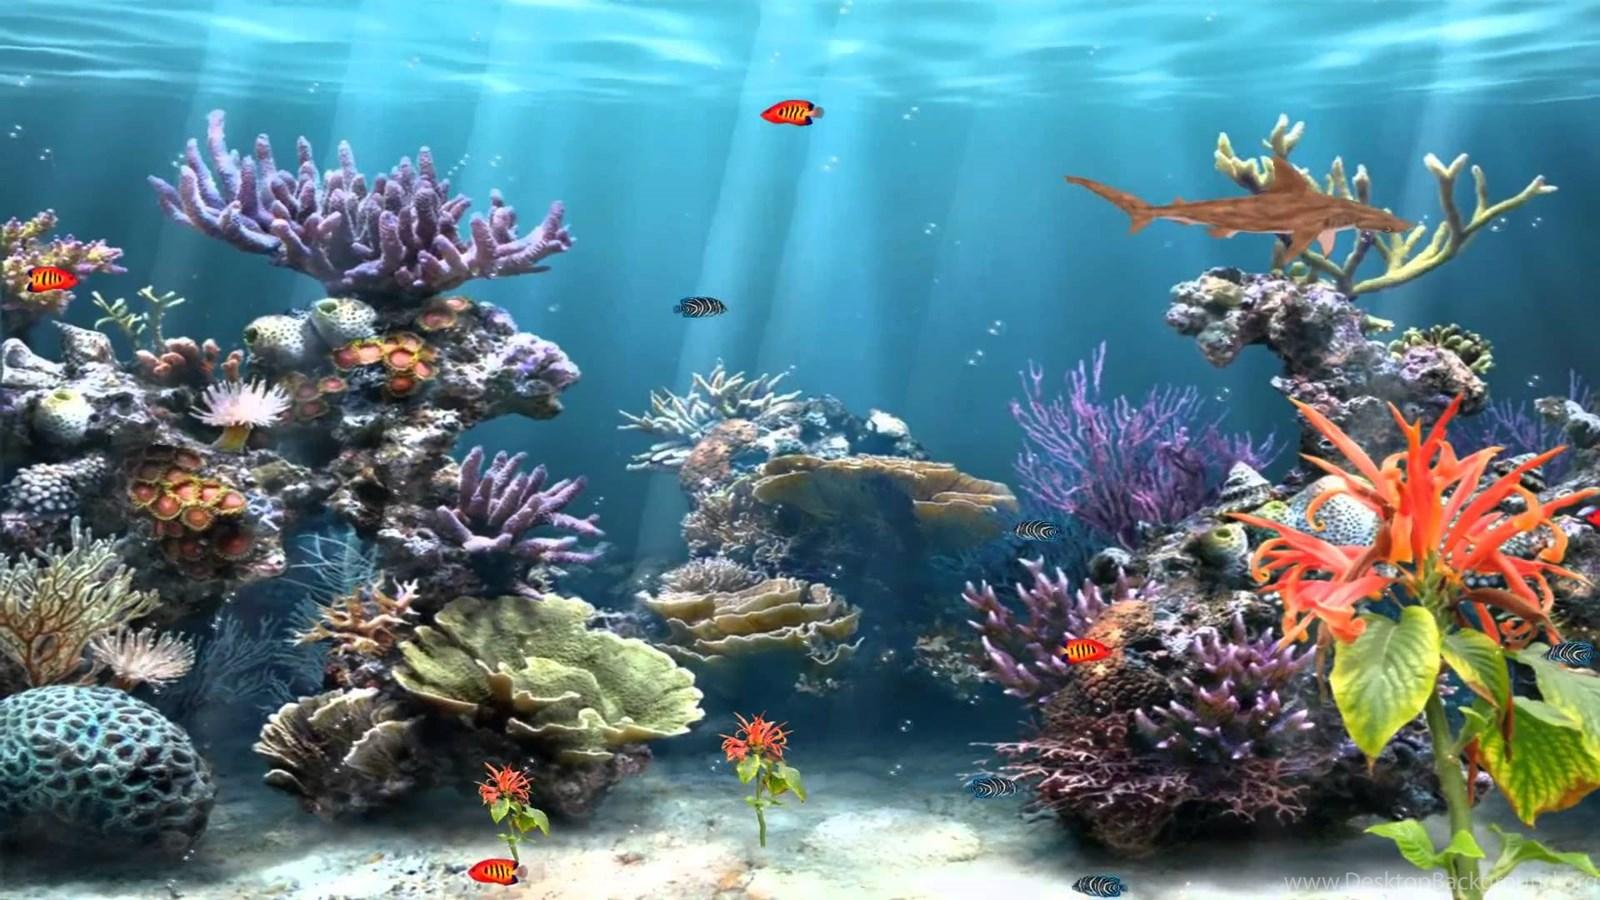 Buy Avikalp Tropical Fish Underwater World Sea Ocean Full HD Wallpaper  91cm x 60cm Multicolour Awi3159 Online at Low Prices in India  Amazonin